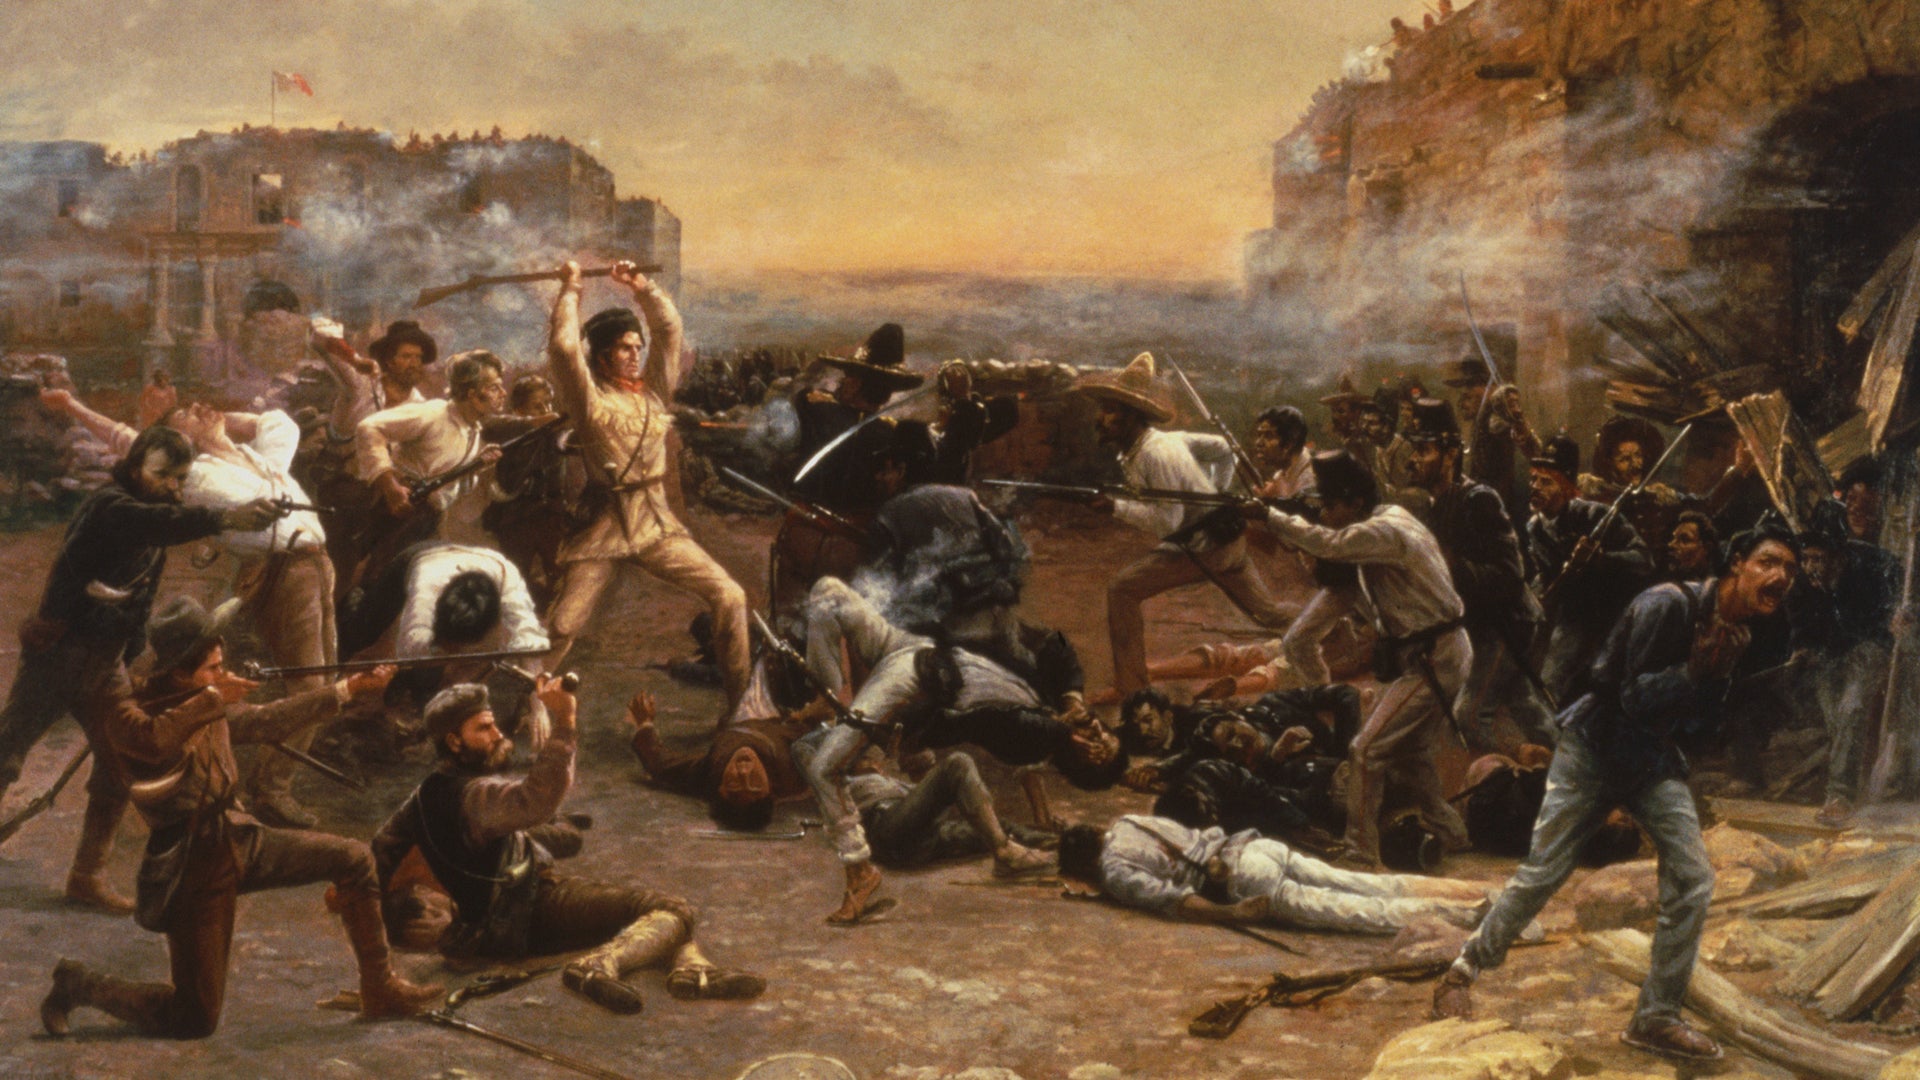 Ghosts of the Alamo | The Battle of the Alamo